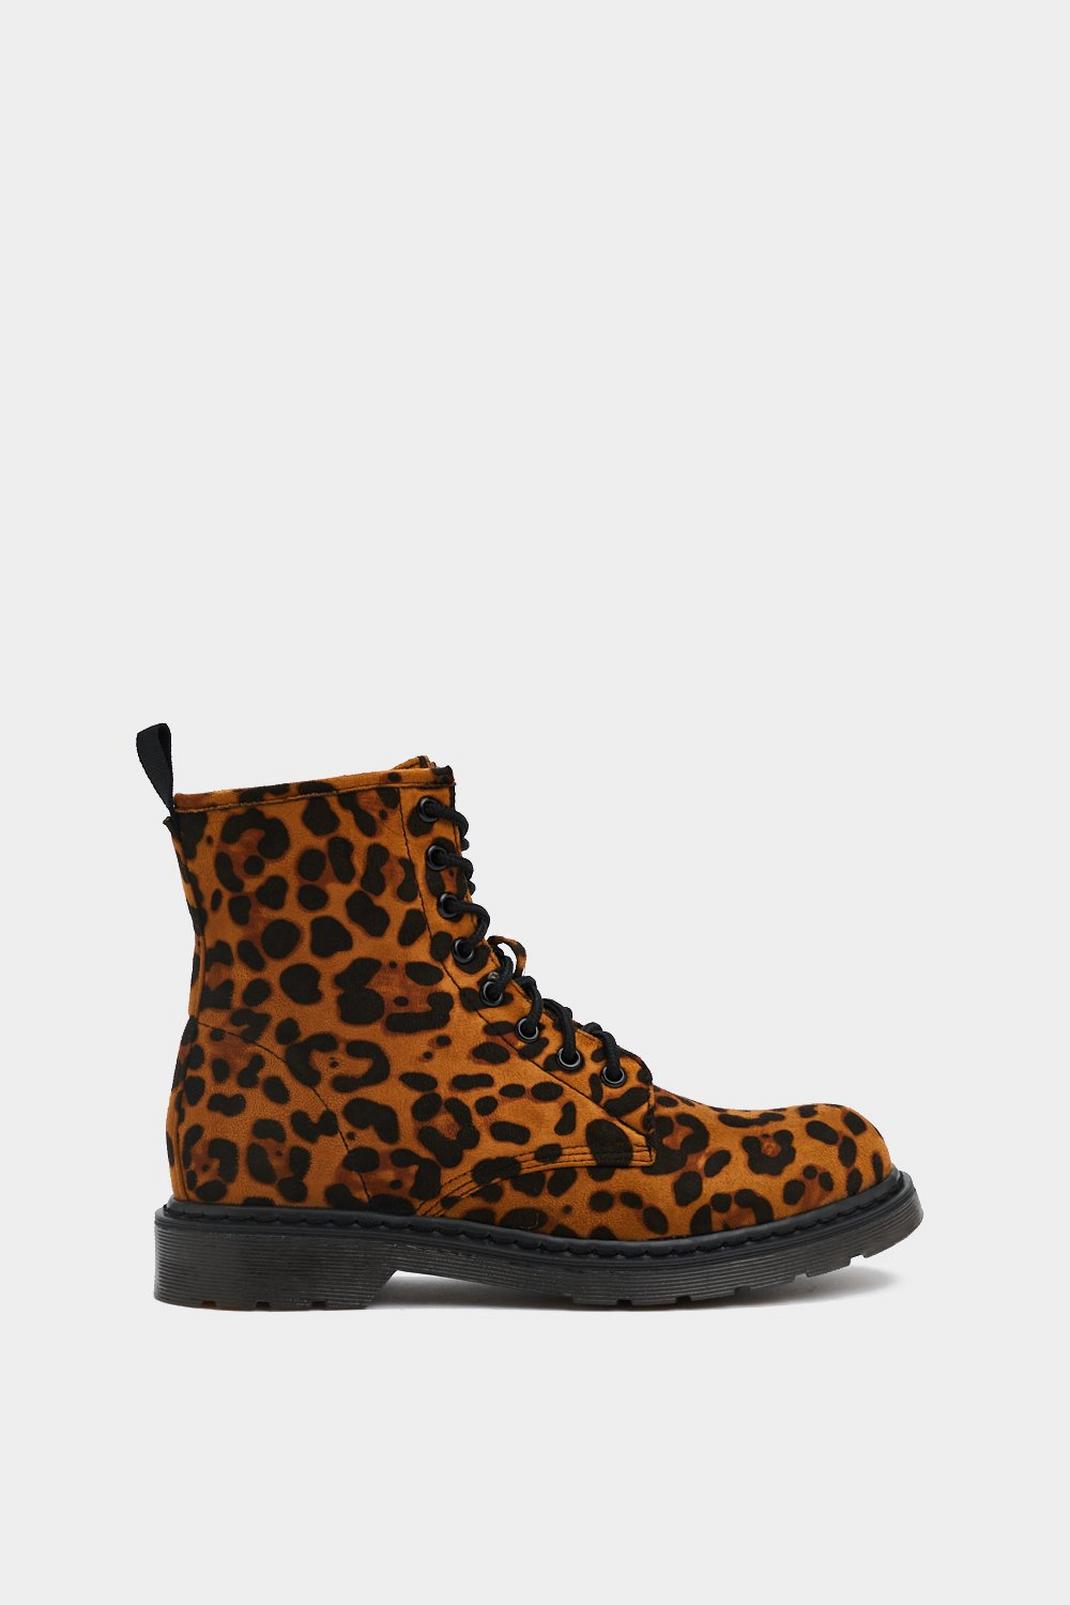 Hunt You Down Leopard Boot | Nasty Gal